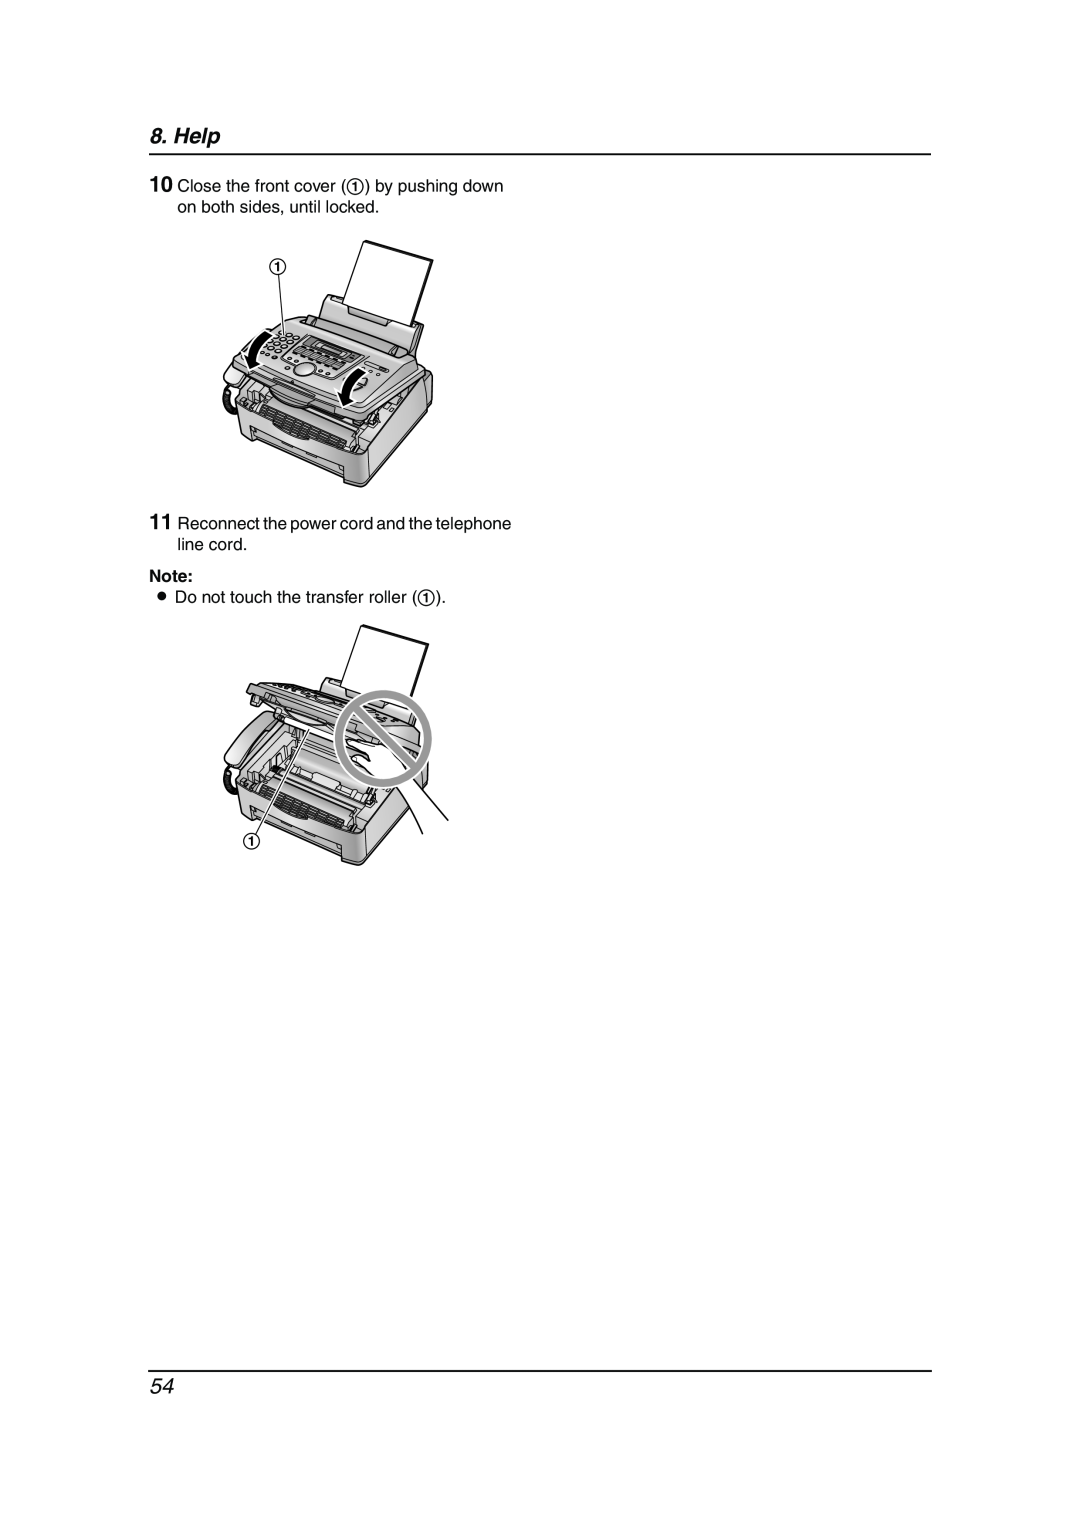 Panasonic KX-FL511AL manual Help, Reconnect the power cord and the telephone line cord, L Do not touch the transfer roller 